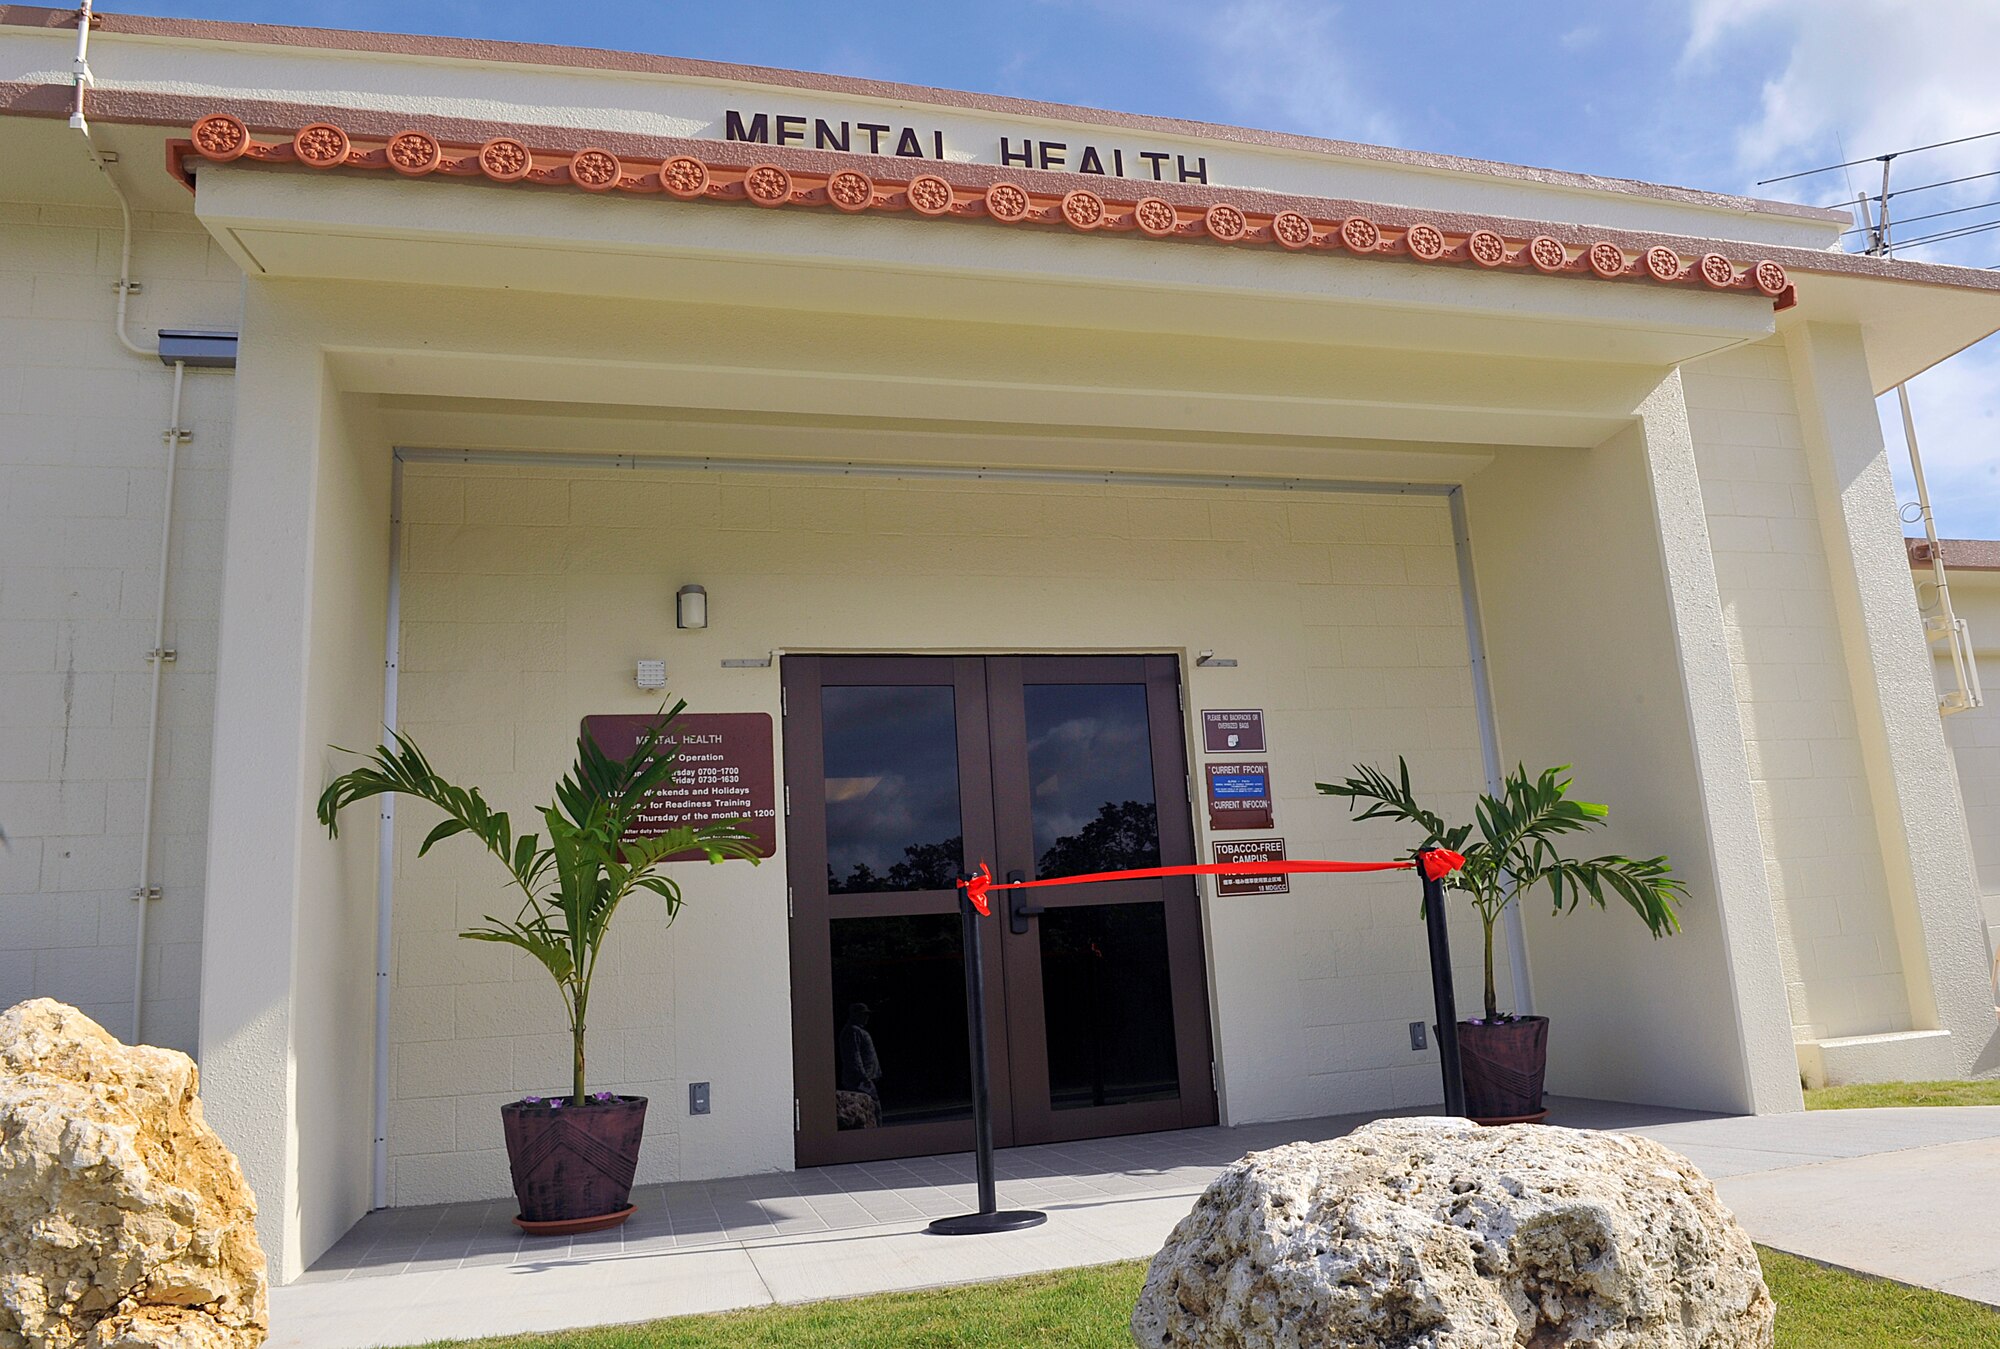 The Mental Health Clinic's newly renovated facility on Kadena Air Base, Japan, opened July 1, 2015. The Kadena Mental Health Clinic serves the mental health needs of more than 16,000 joint service beneficiaries, including U.S. Air Force, Army, Navy active duty service members, retirees, Department of Defense Dependents Schools civilians and their families. (U.S. Air Force photo by Naoto Anazawa)